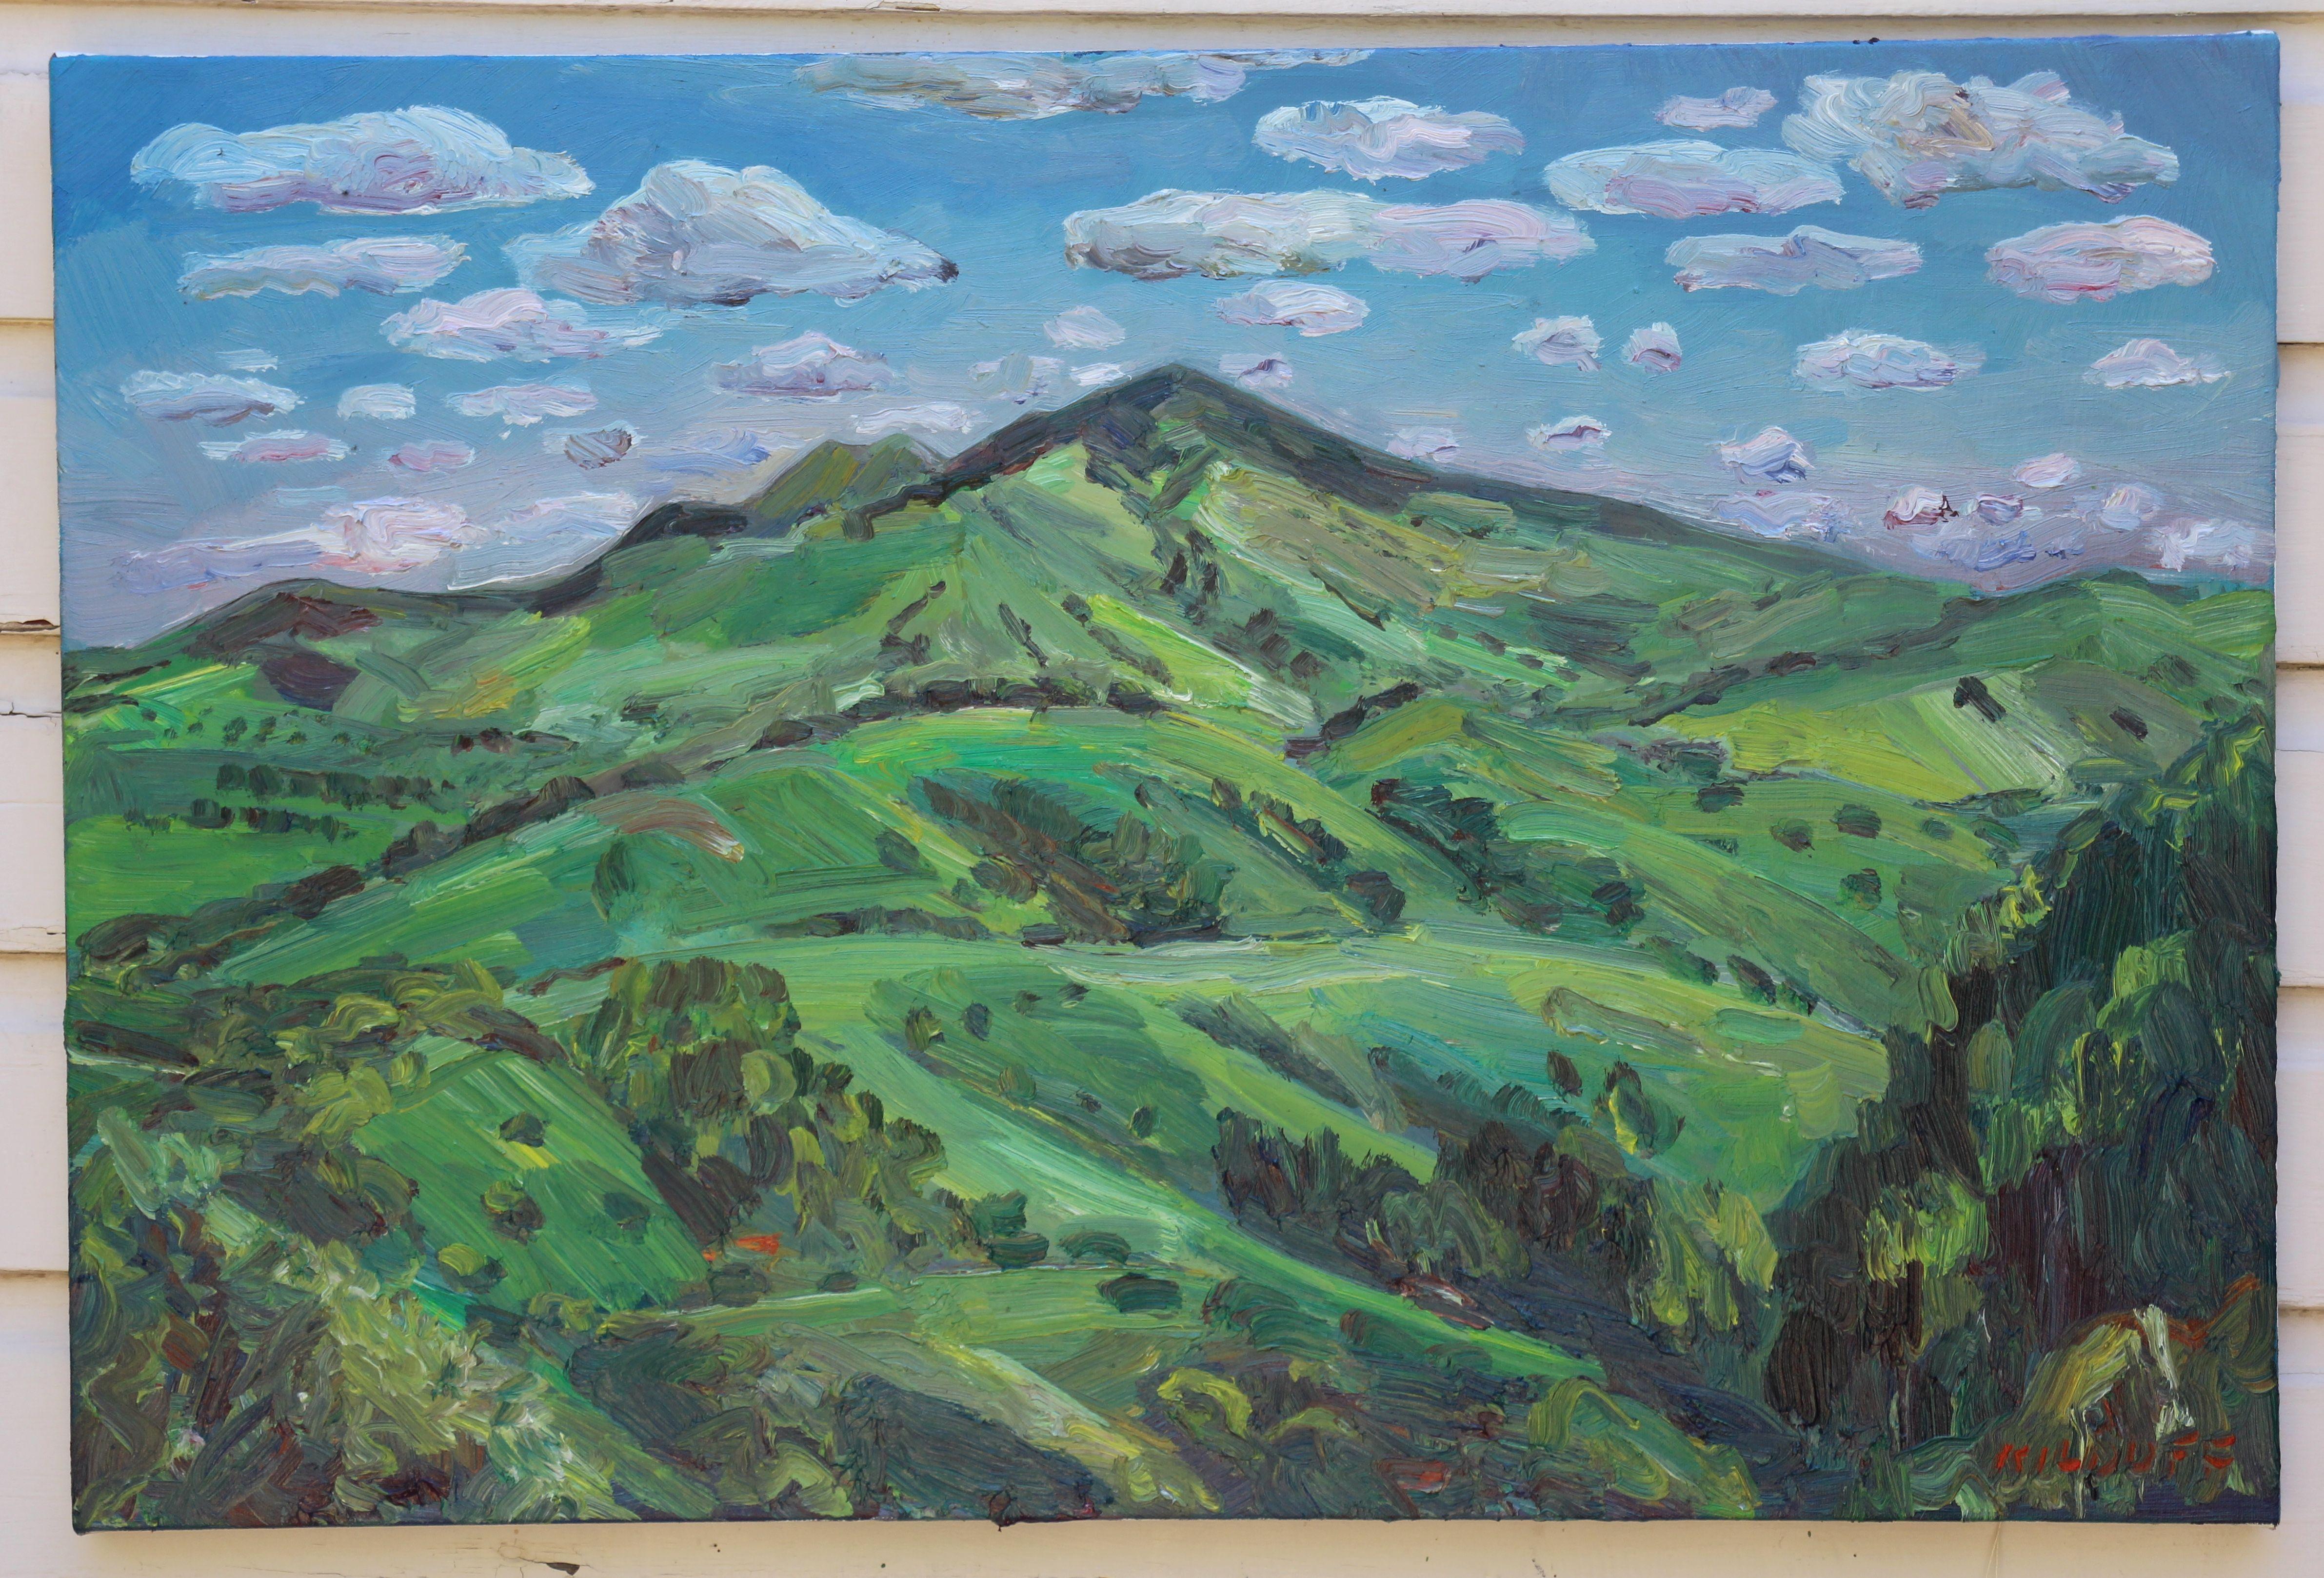 This large painting was painted in plein air (painted on location) in Oakland,California. The view is of Mount Diablo, which is the largest mountain in the East Bay (San Fransisco Bay).Painting is full of thick, bold, colorful brushstrokes.   ::